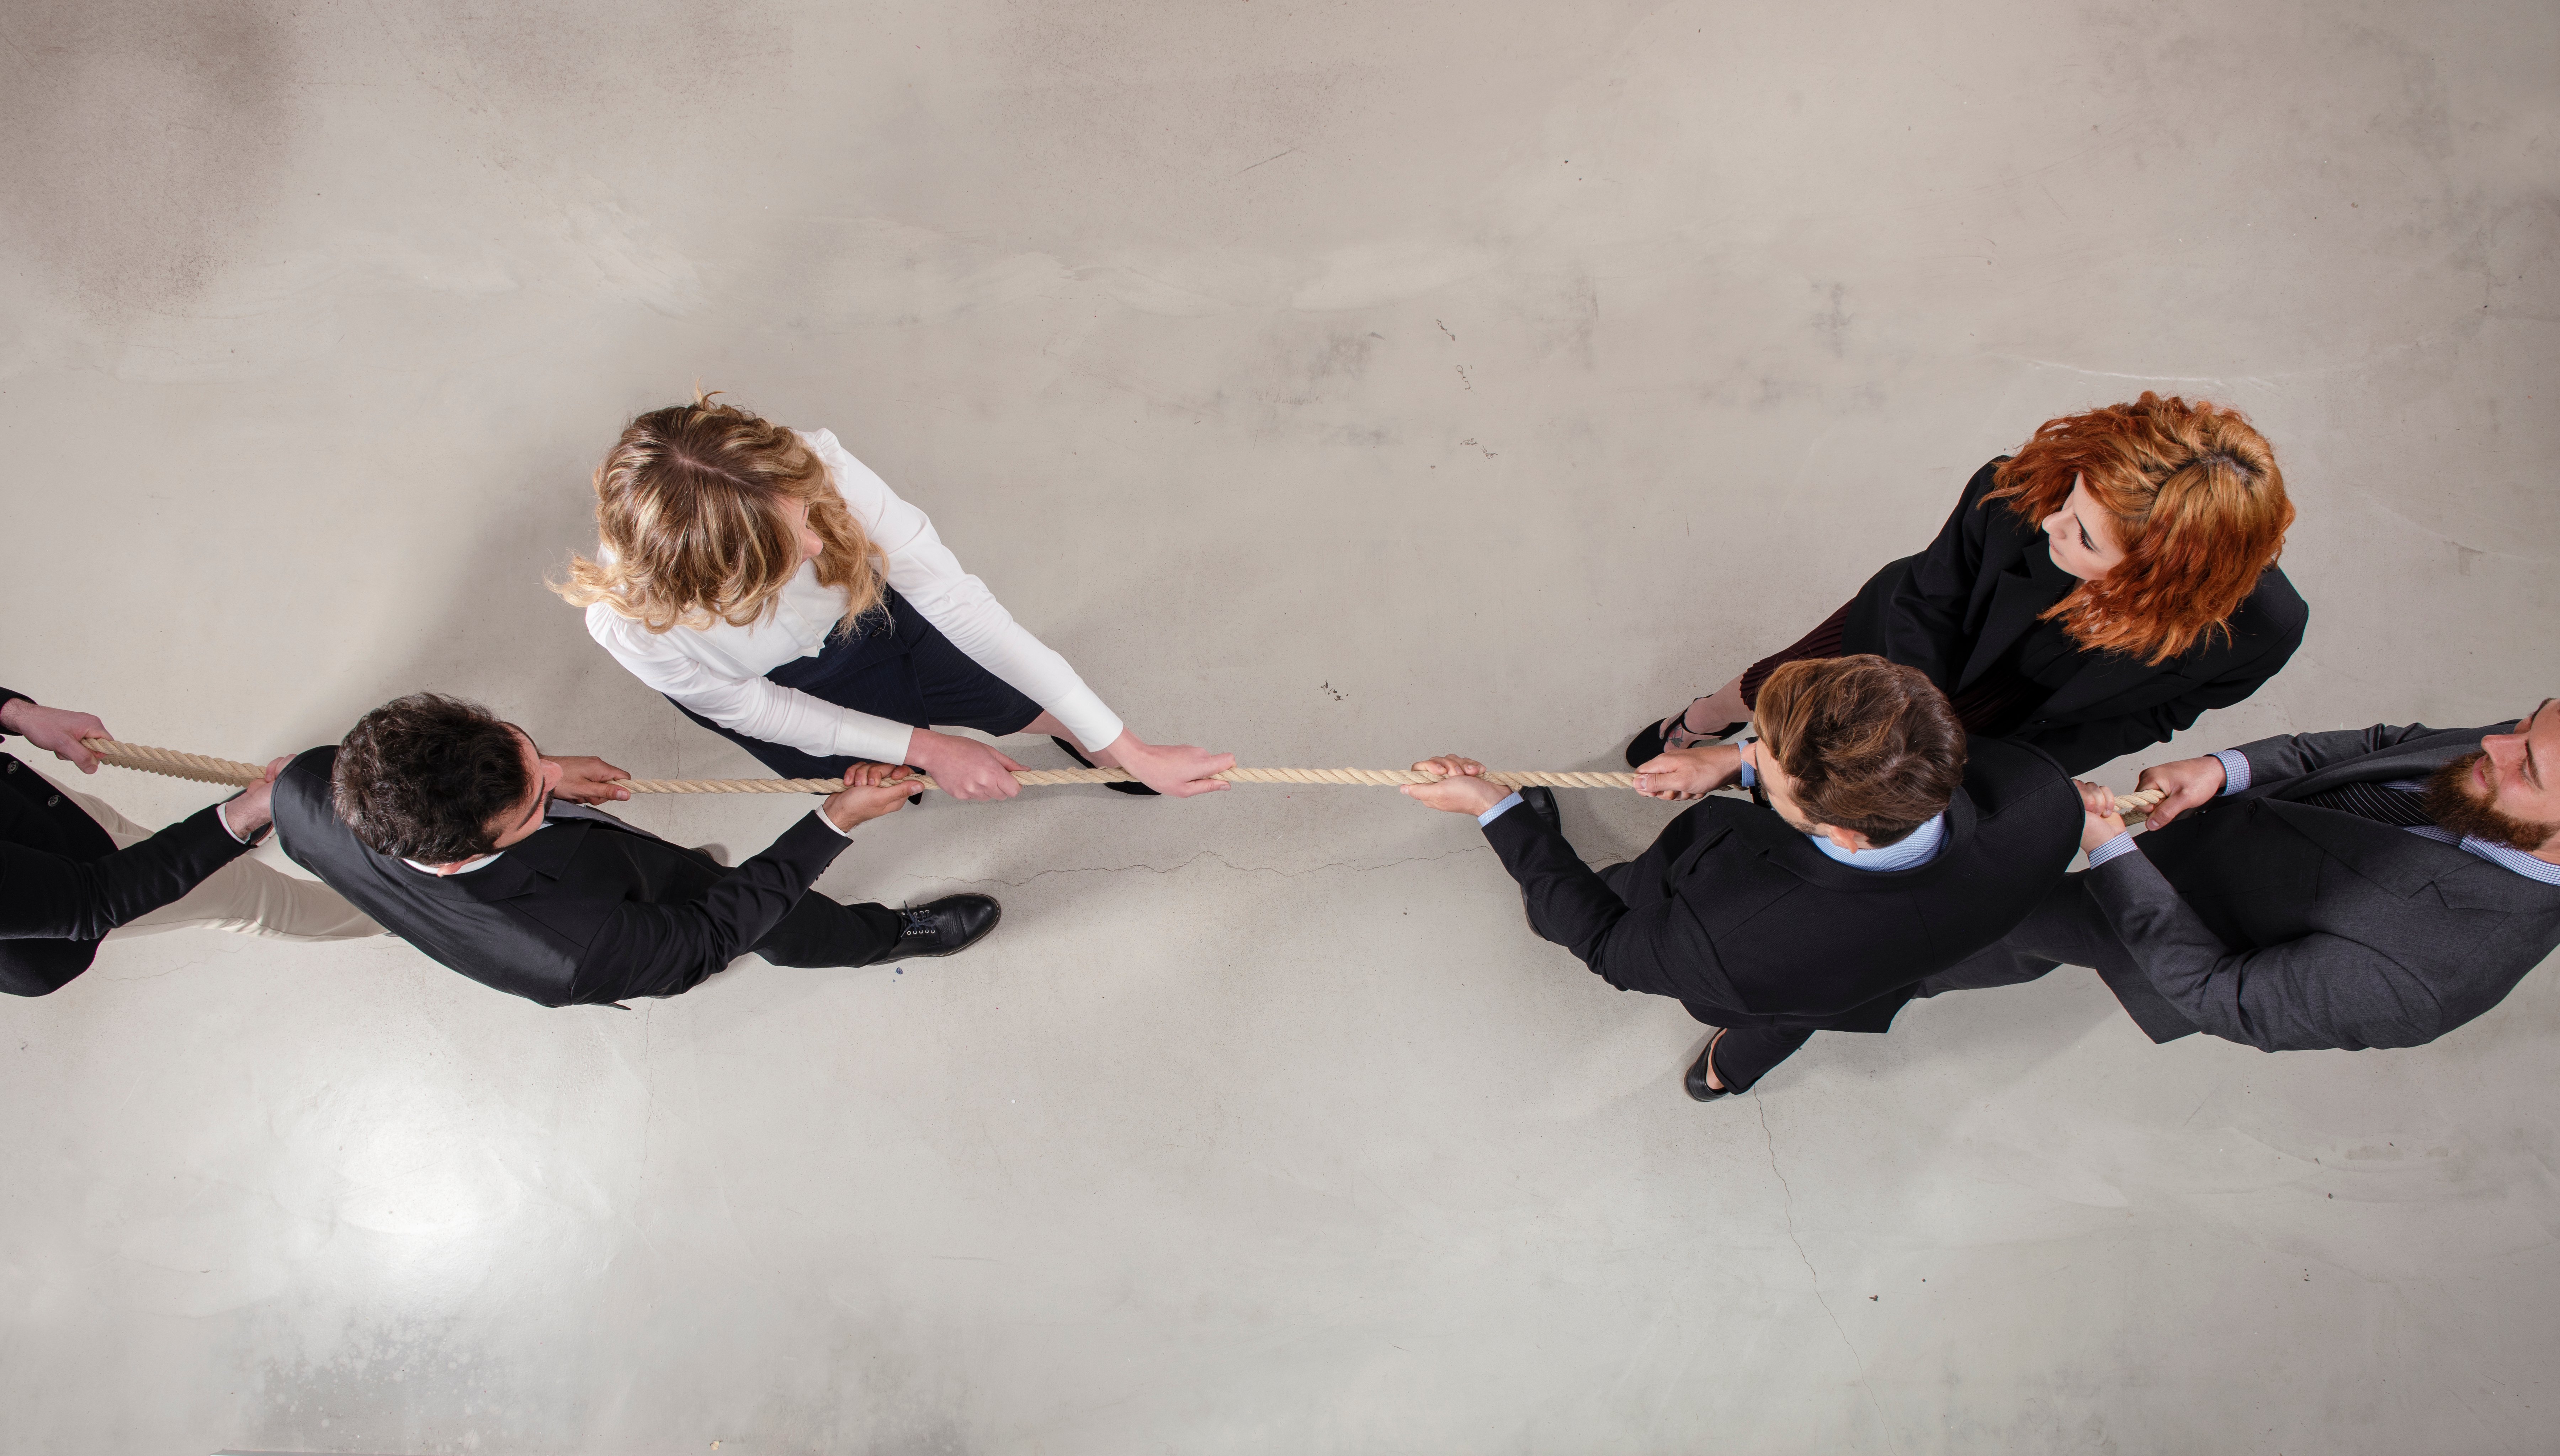 Sometimes negotiations can feel like a game of tug-of-war.